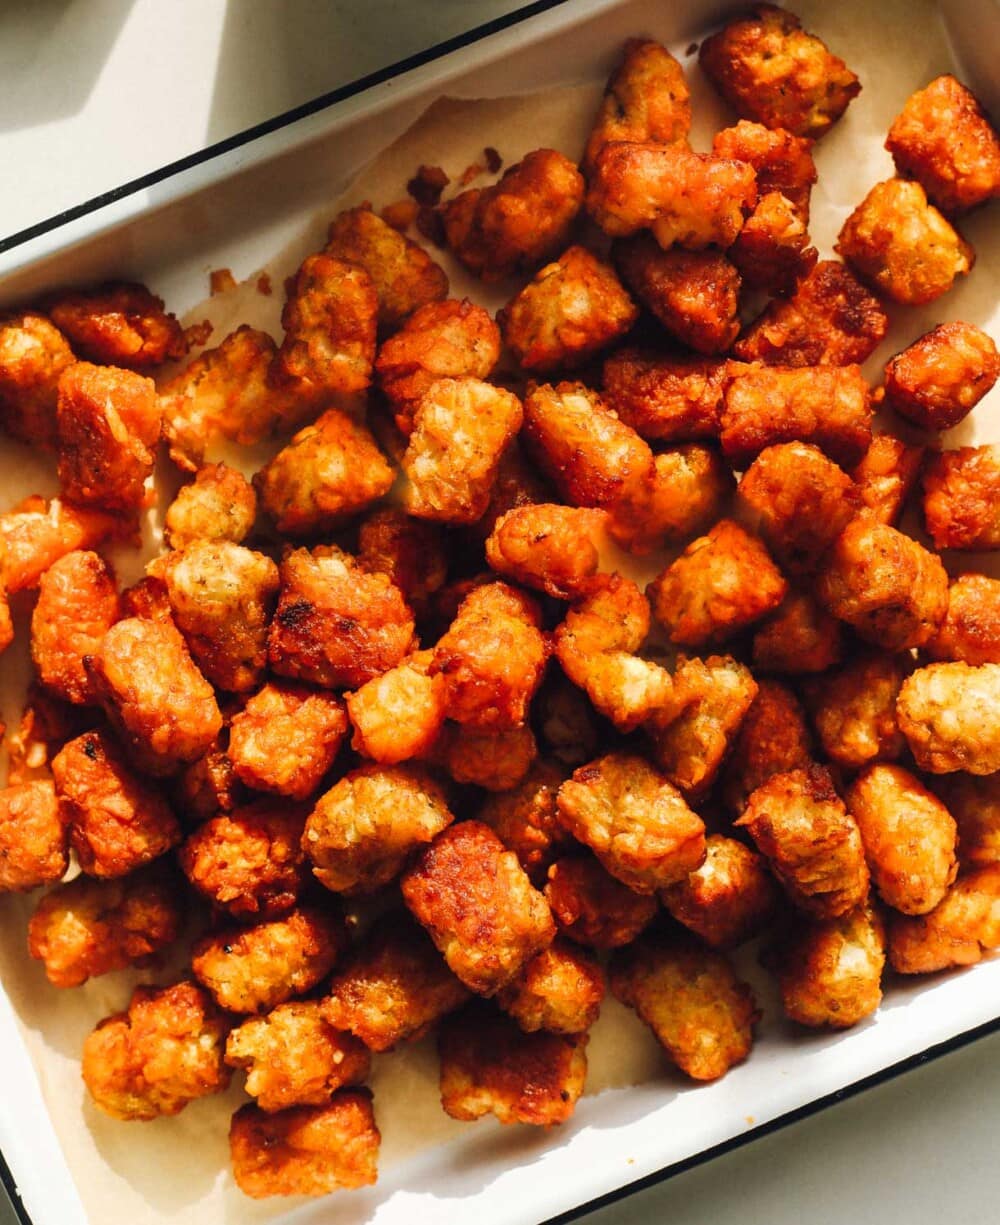 tater tots tossed in buffalo sauce